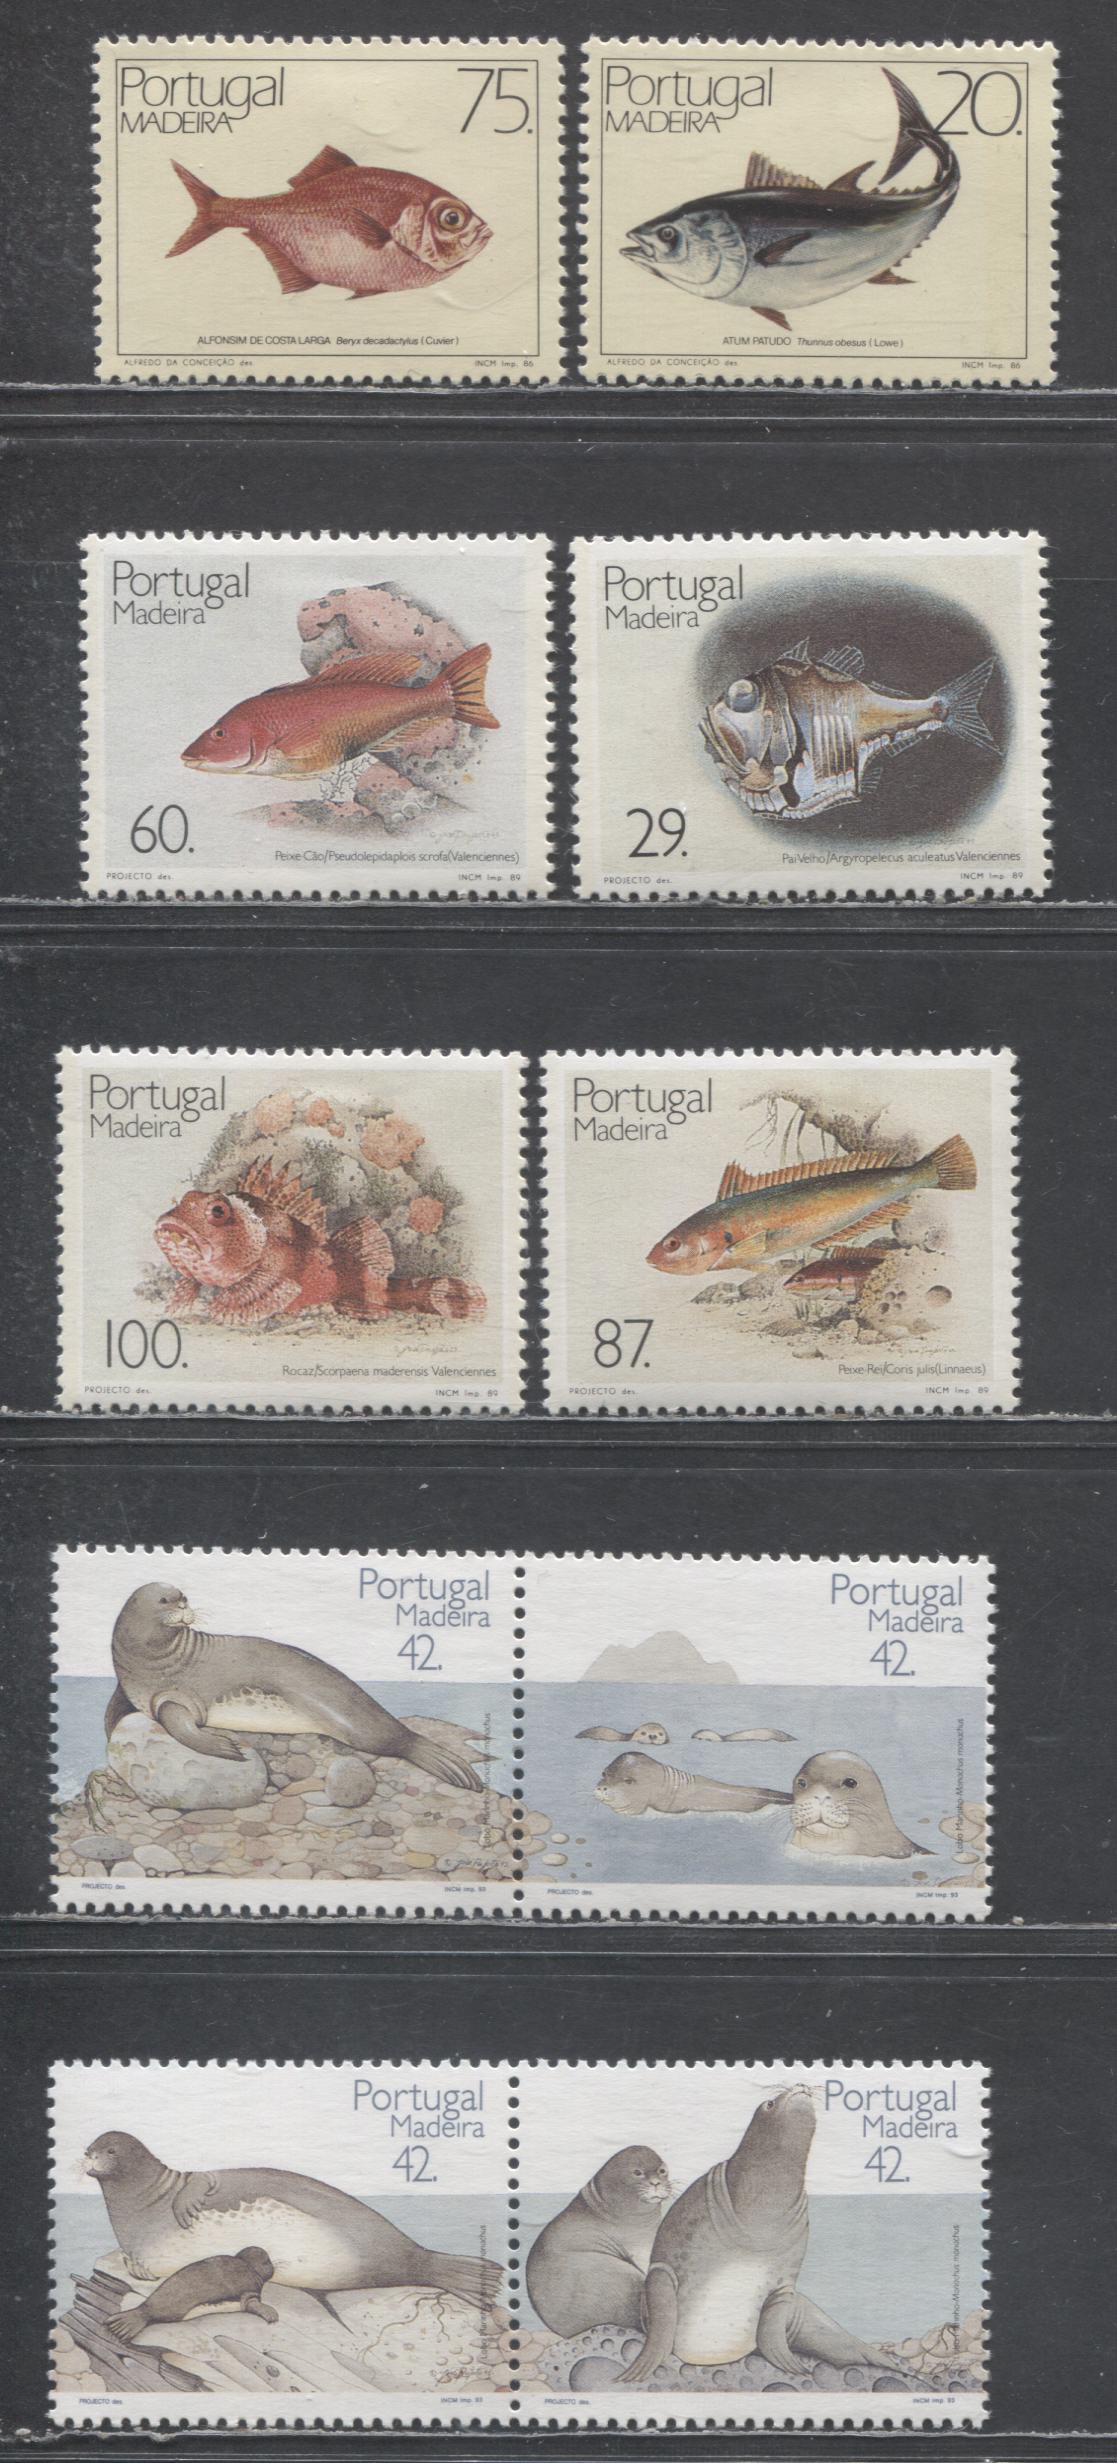 Lot 73 Portugal - Madeira SC#108-136 1986-1993 Fish - Nature Preservation Issues, 8 VFOG/NH Singles & Pairs, Click on Listing to See ALL Pictures, 2017 Scott Cat. $12.75